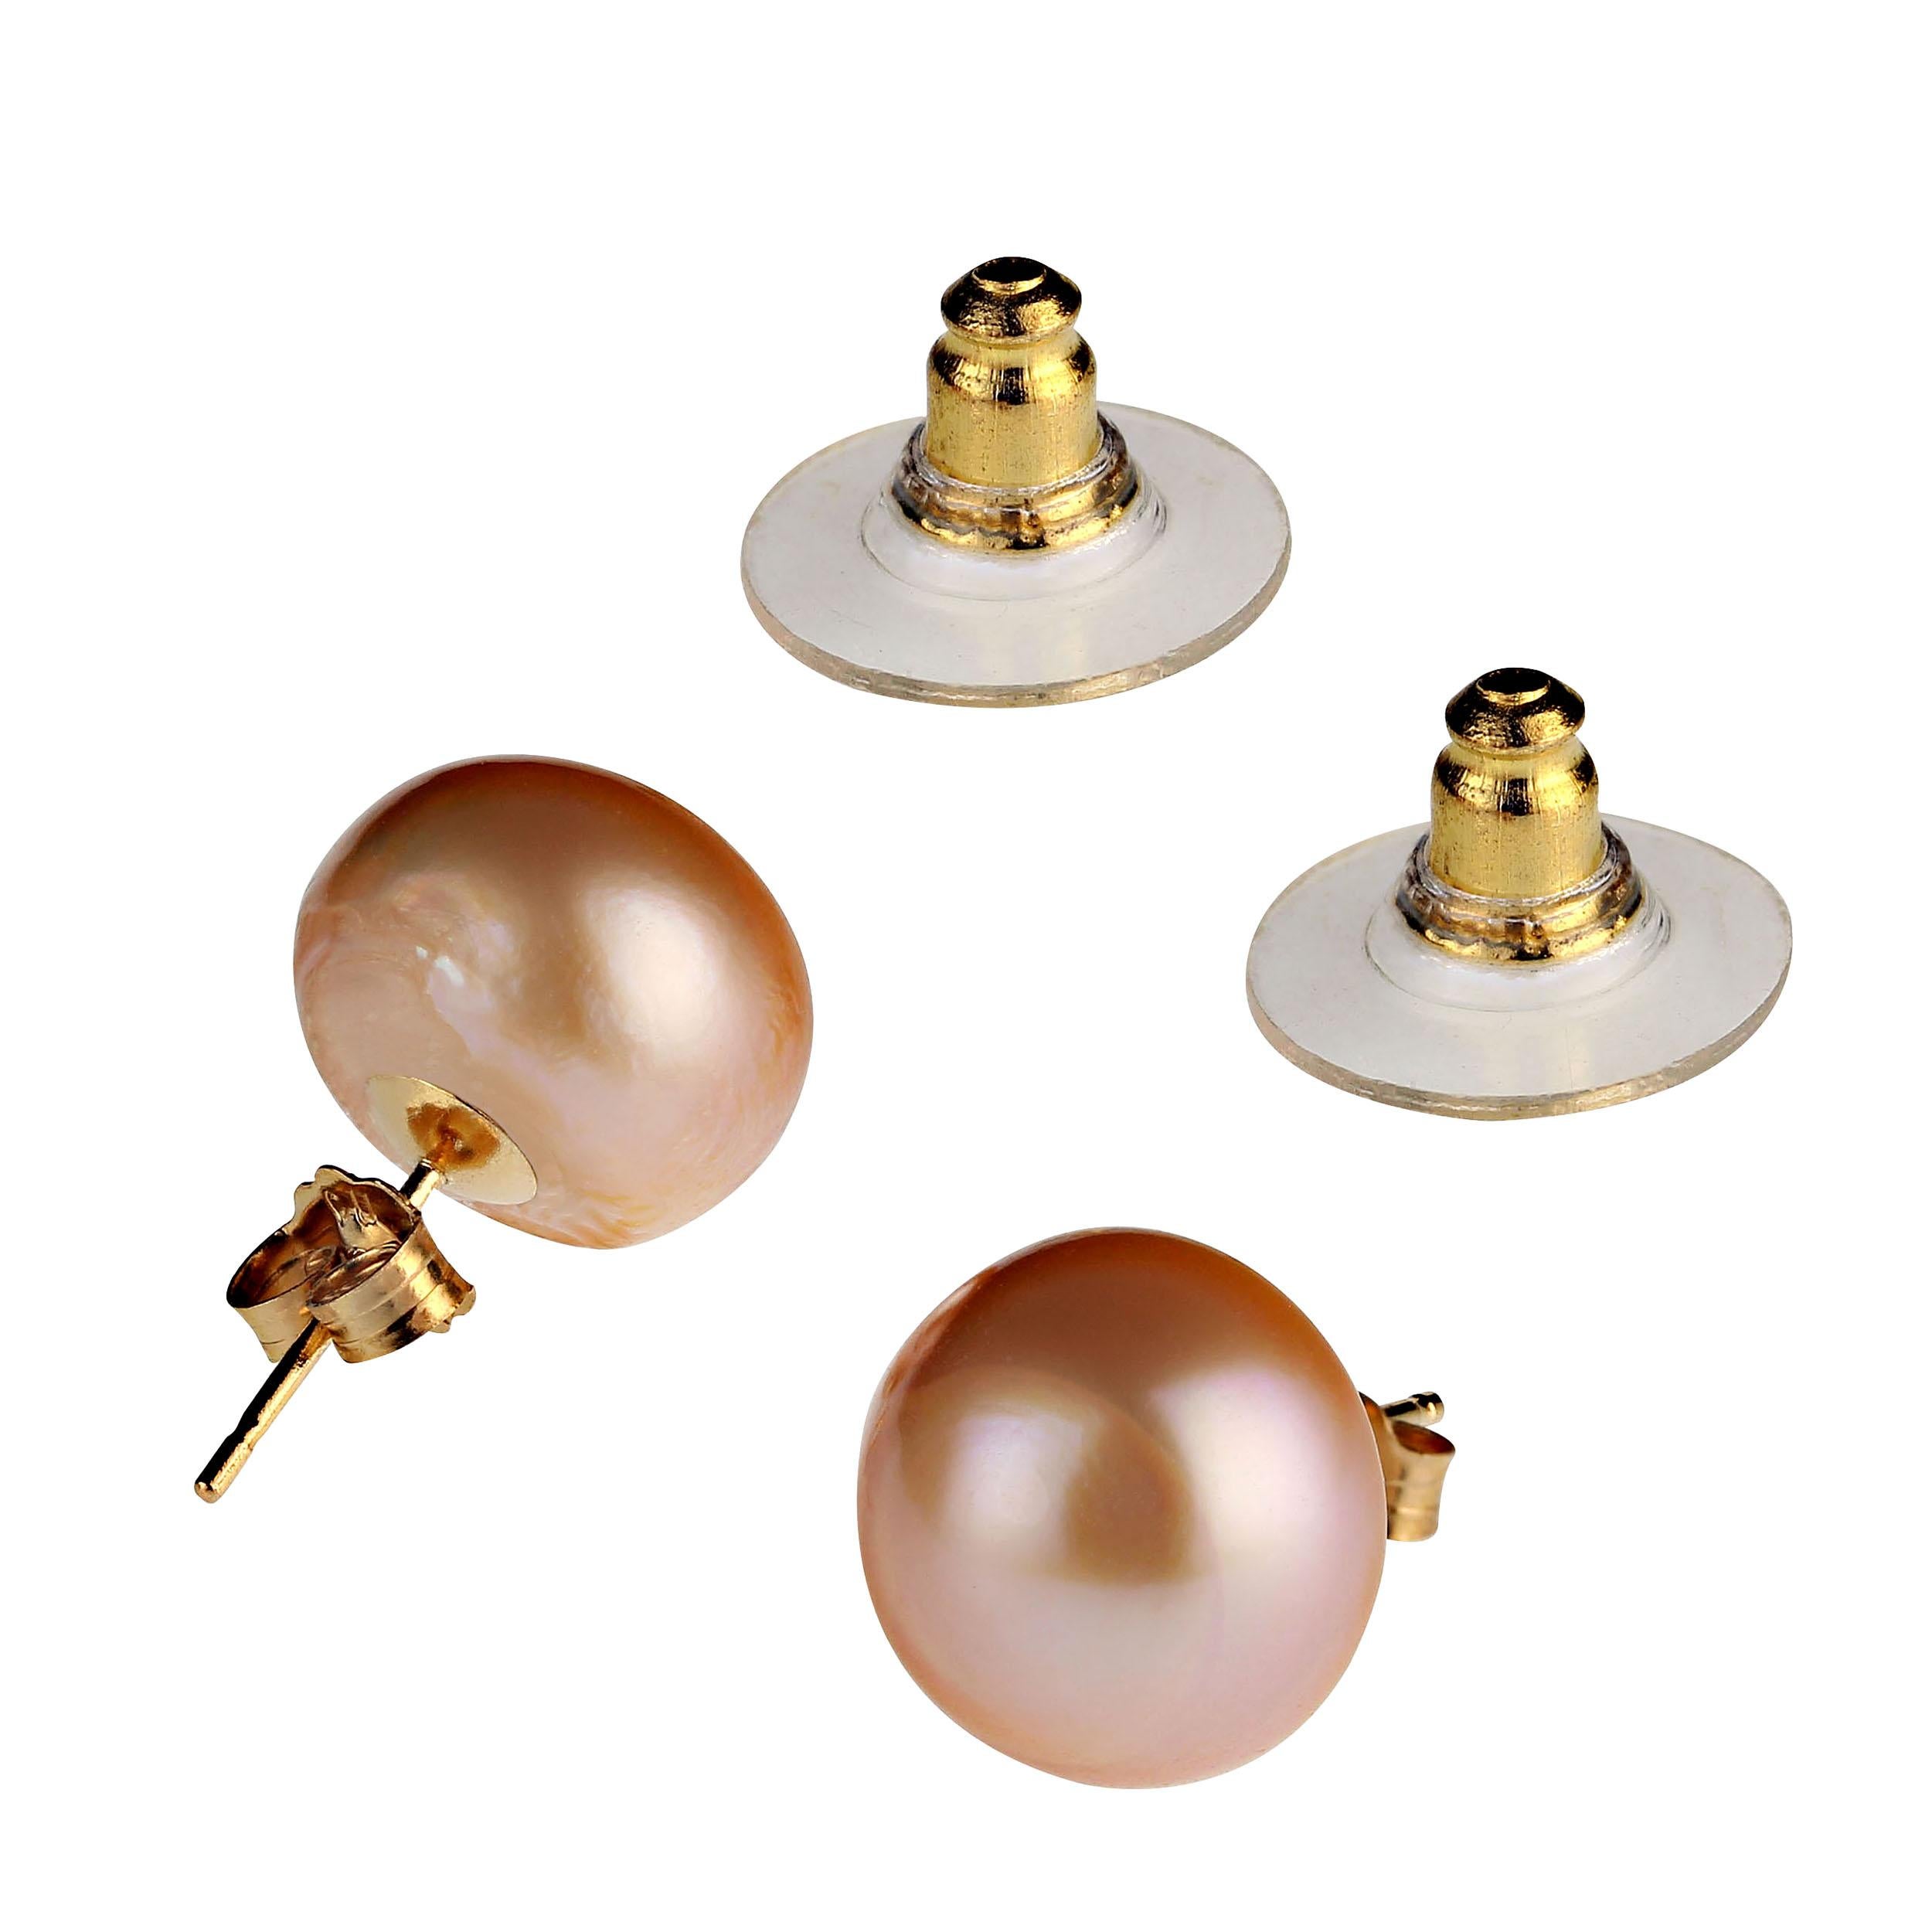 Your classic jewelry must have, lustrous, glowing 11MM Pearl Studs. These gorgeous studs are iridescent bronzy with 14k yellow gold posts, push backs, and cushion backs.  The cushion backs ensure comfort and keep the pearl secured properly on your